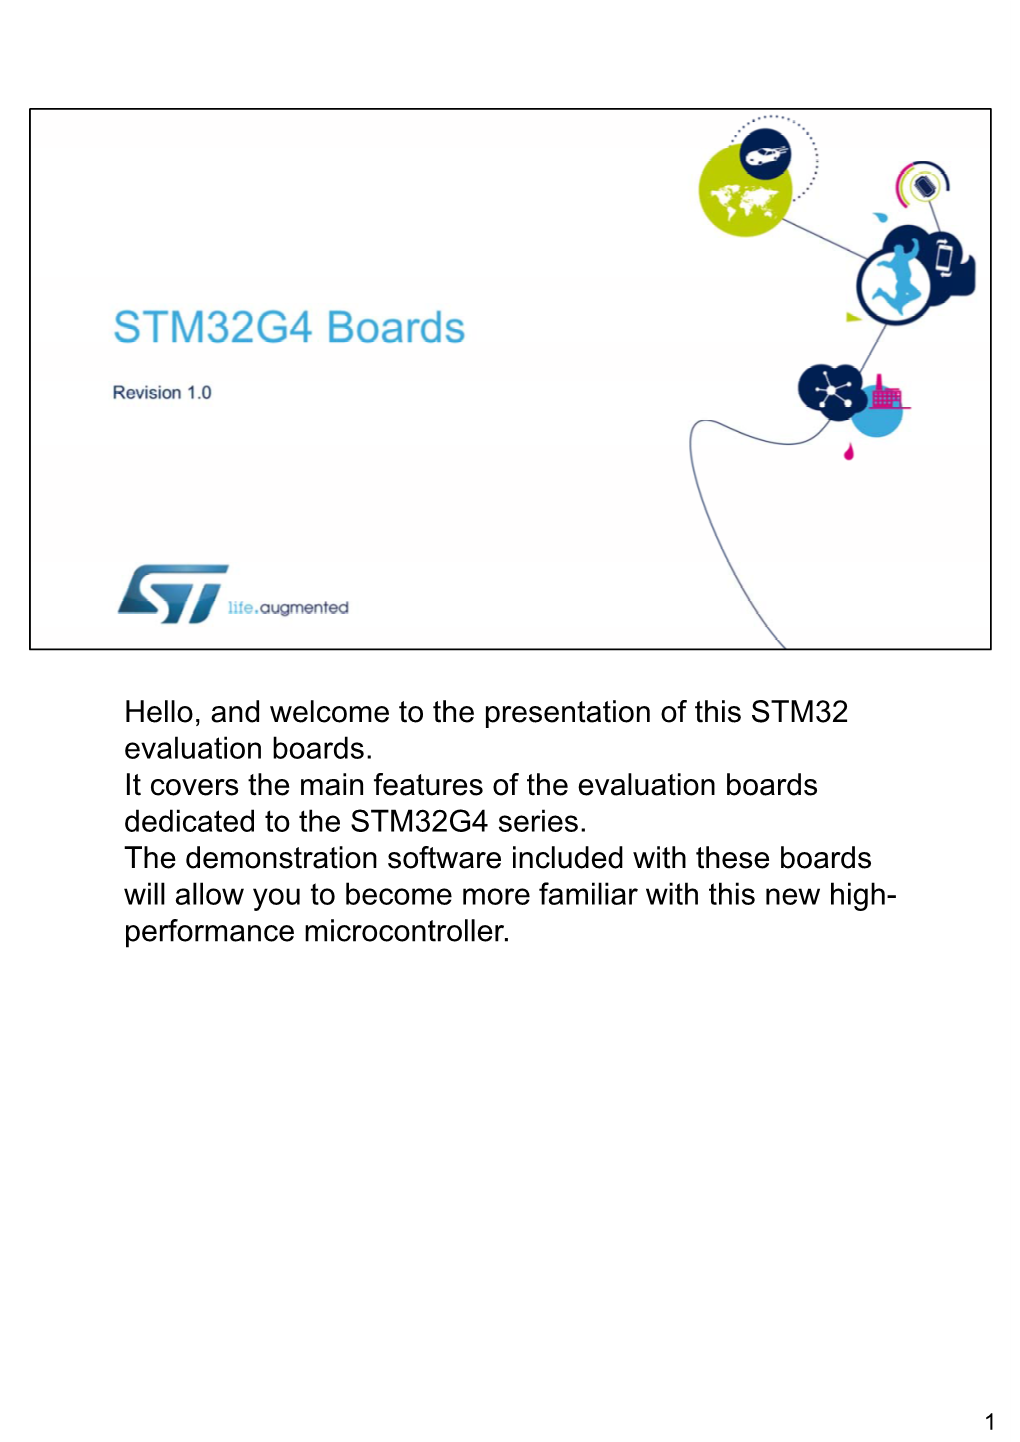 Hello, and Welcome to the Presentation of This STM32 Evaluation Boards. It Covers the Main Features of the Evaluation Boards Dedicated to the STM32G4 Series